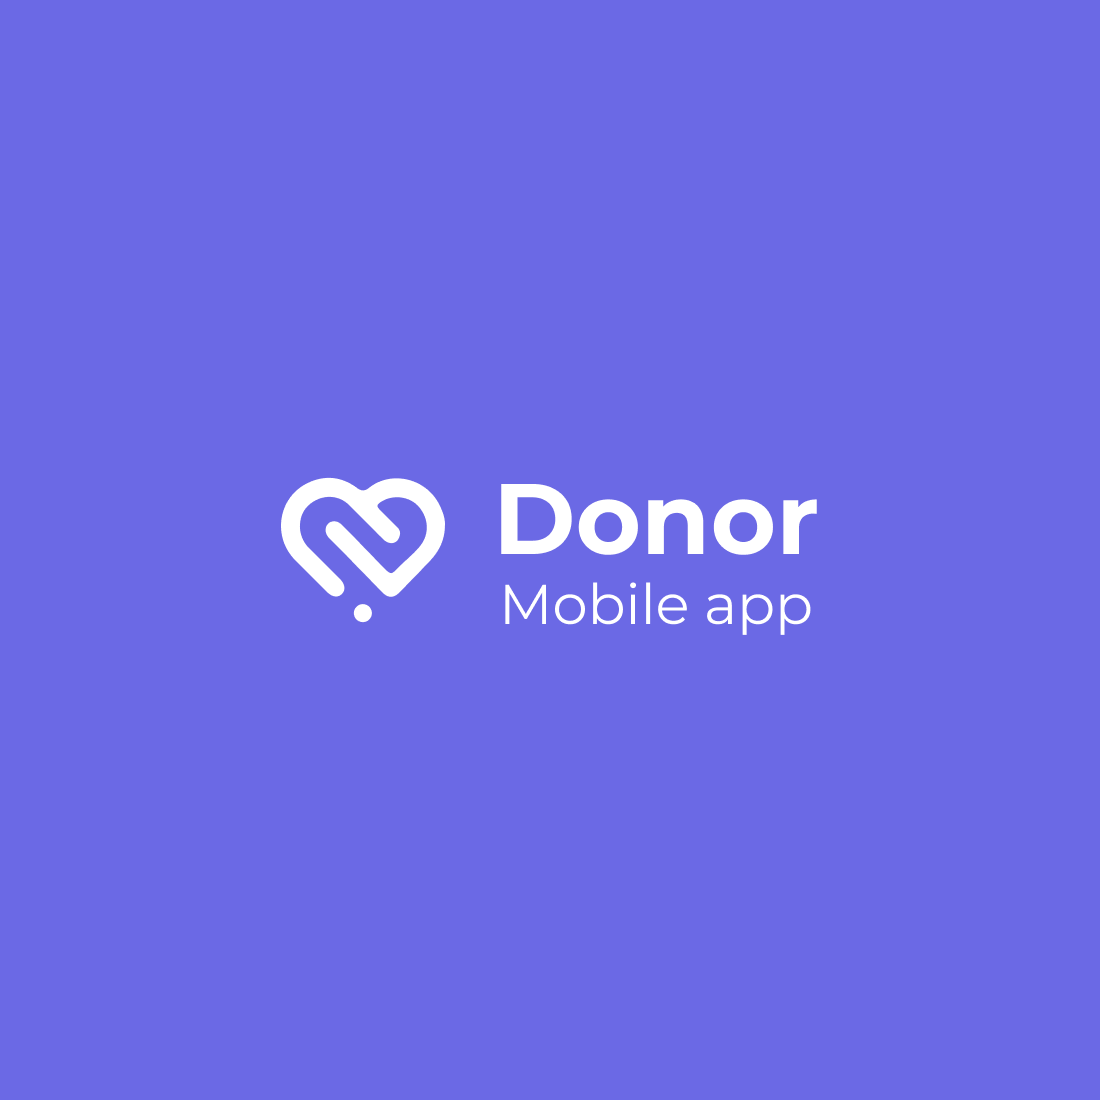 Donor Mobile App | Onboarding main cover.